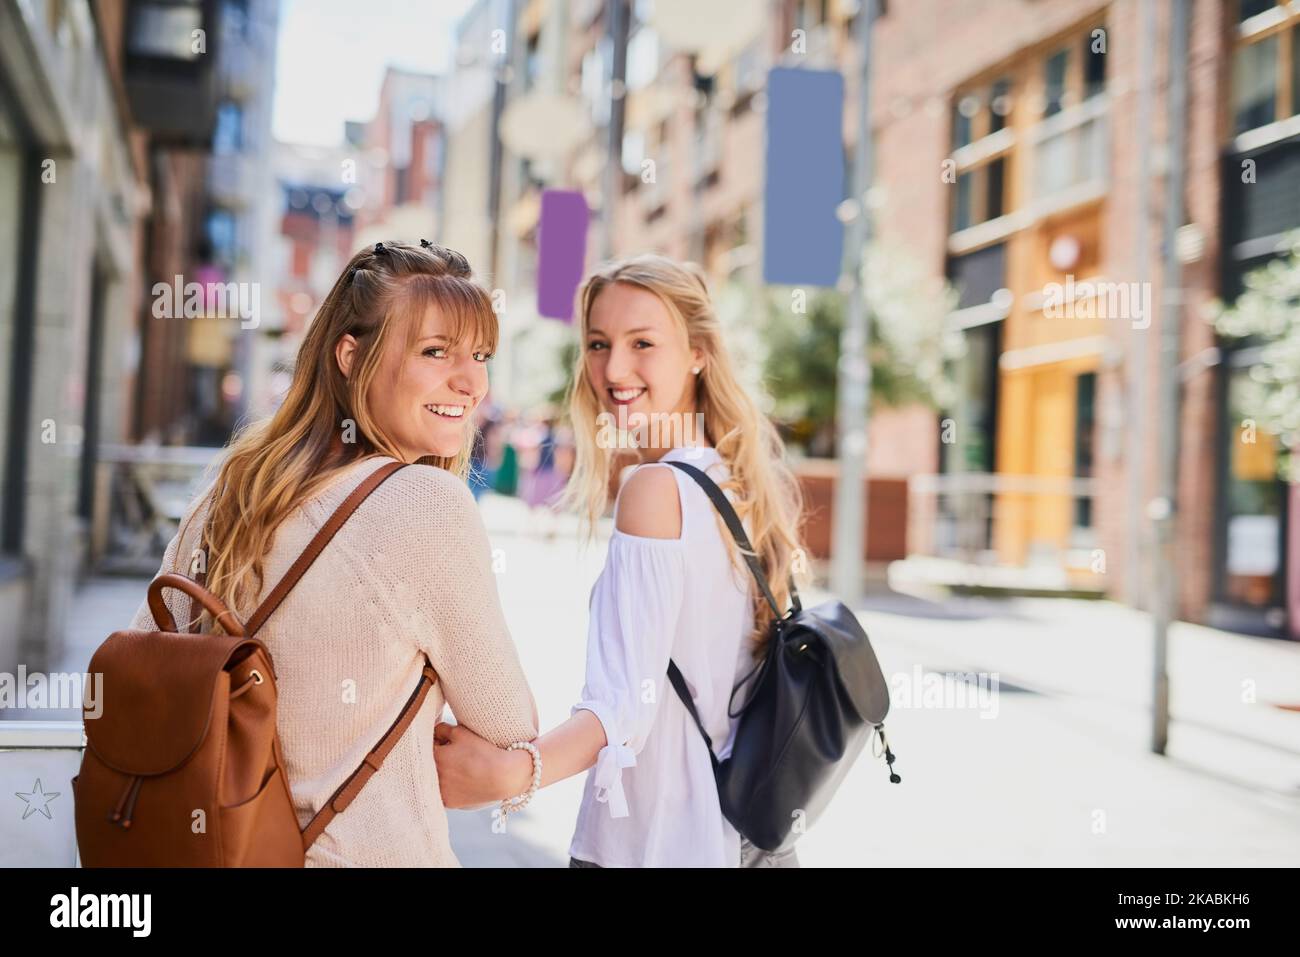 We love travelling. Rearview portrait of two attractive young girlfriends exploring a foreign city. Stock Photo